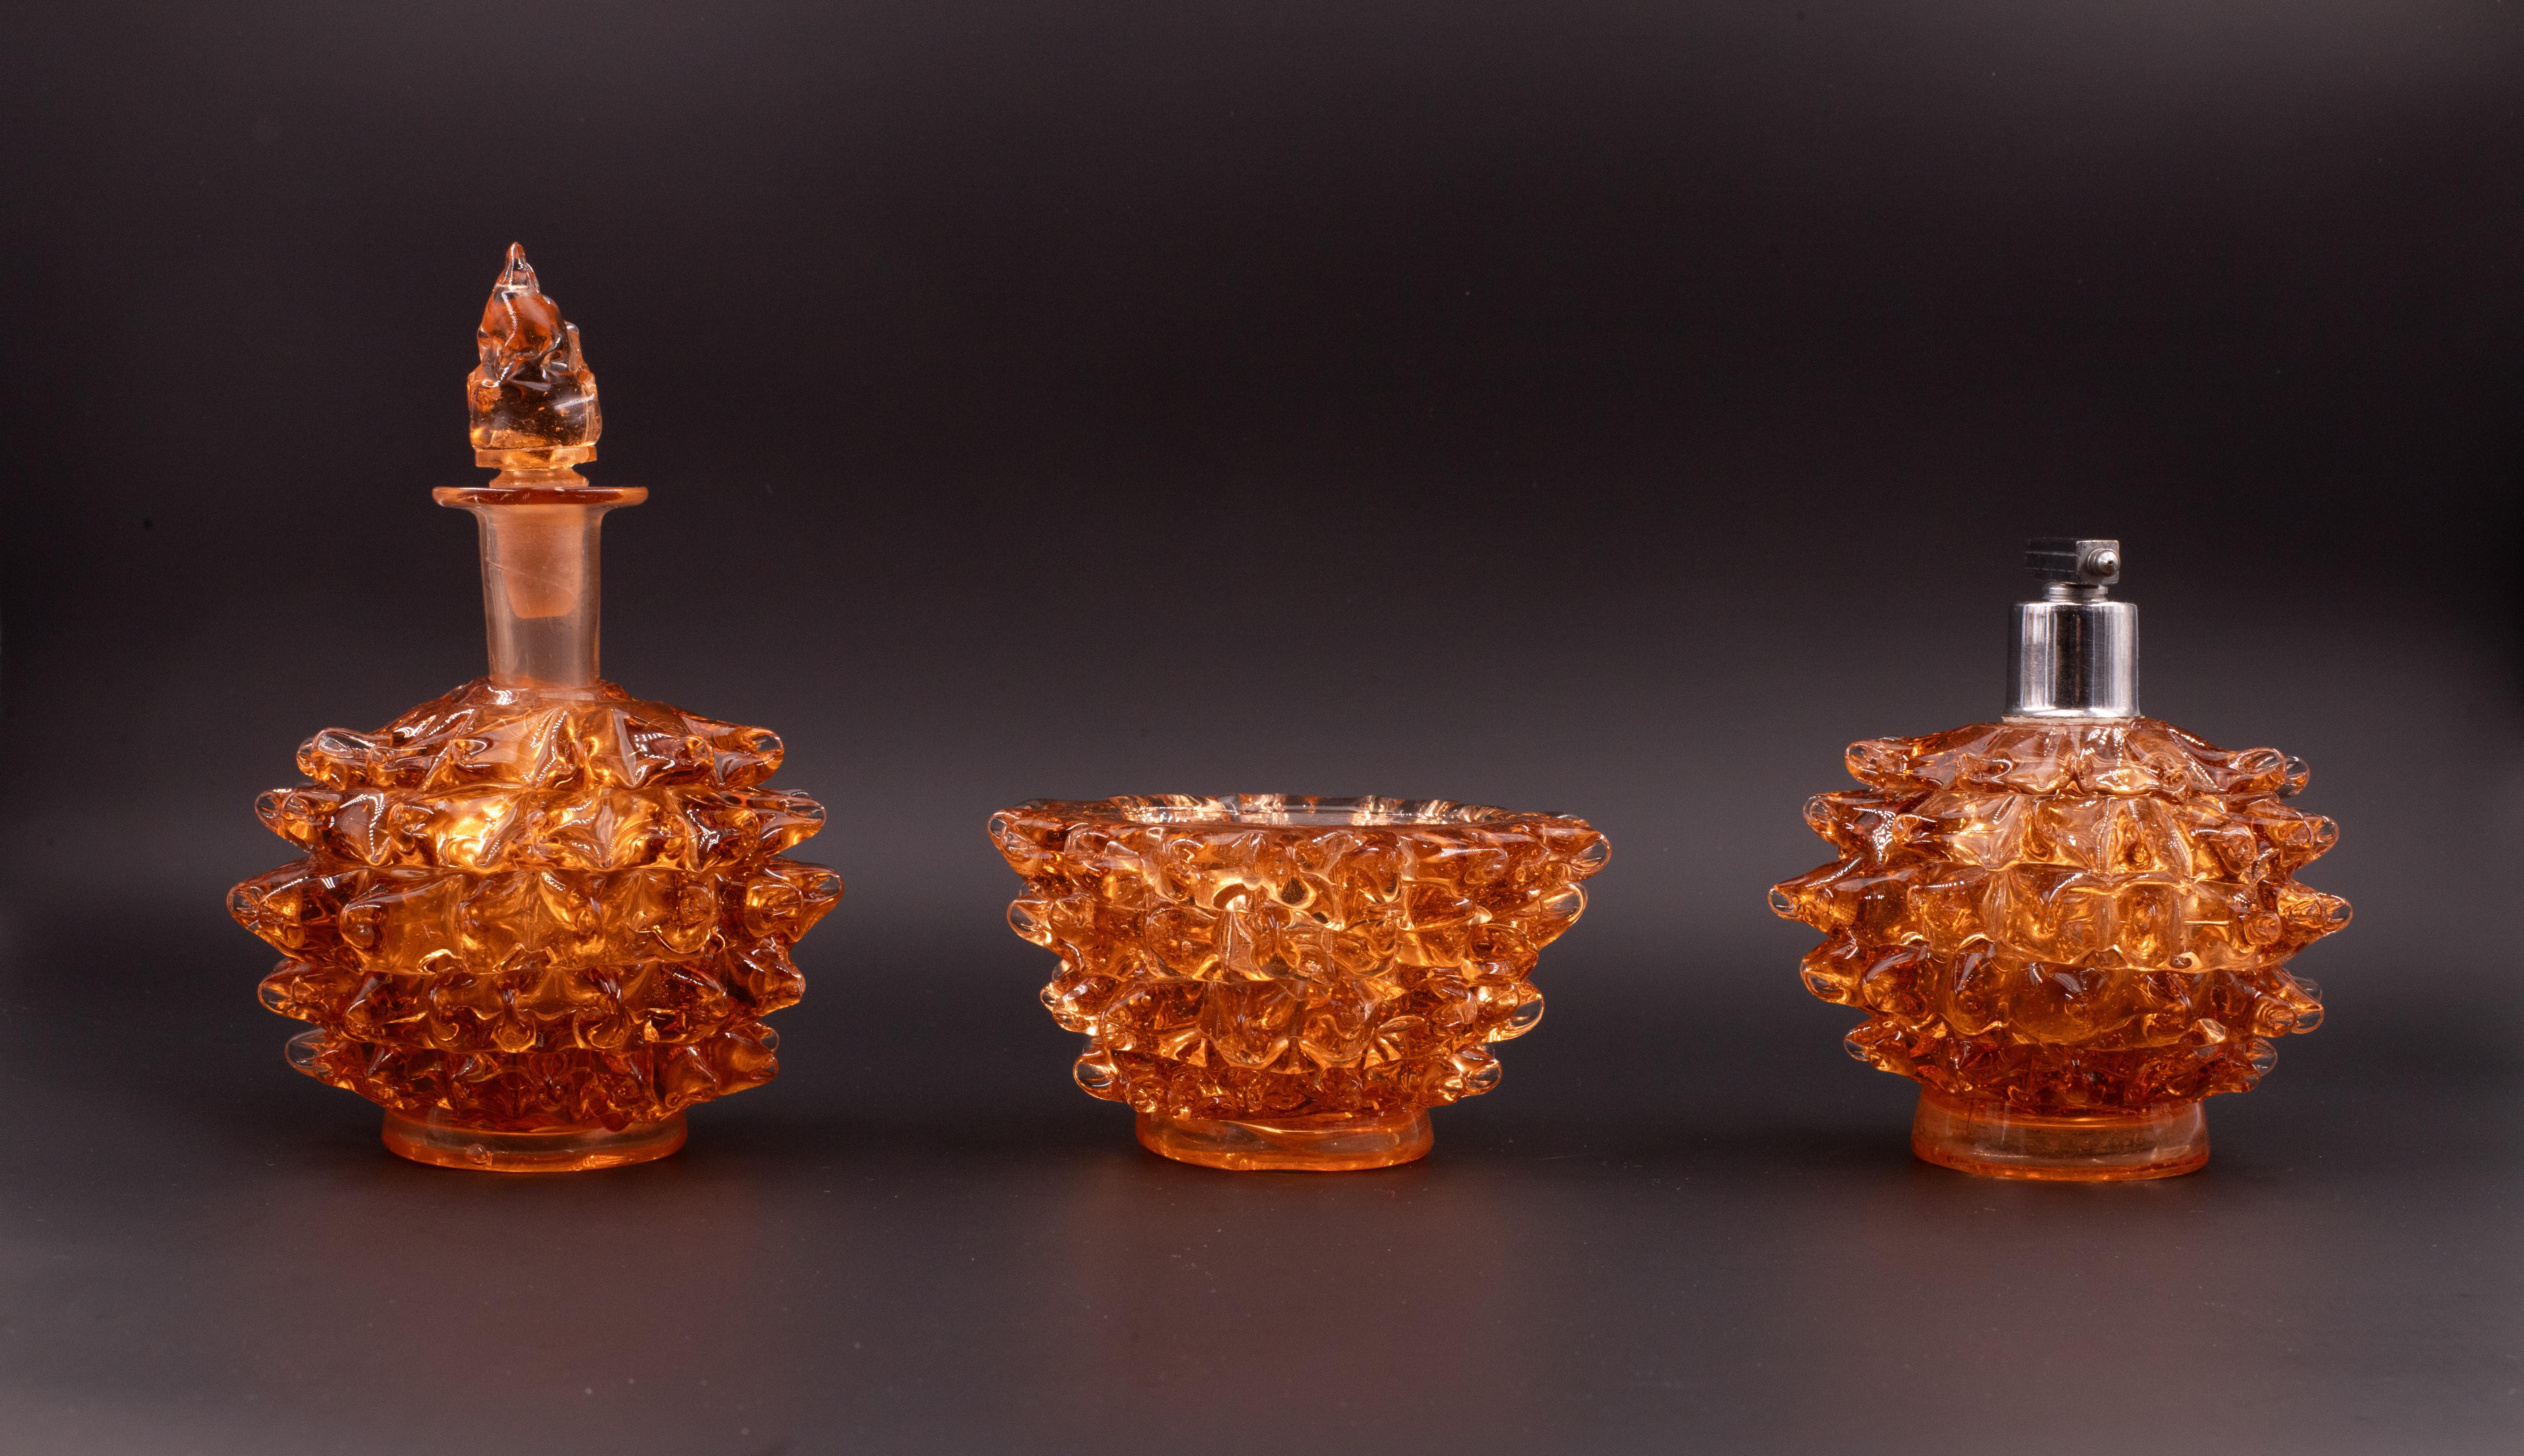 Incredible set of 3 Murano glass vases in a rare mid-century amber rostrato. This beautiful object was produced in the 1940s in Italy by Ercole Barovier for Barovier & Toso. 
This masterpiece is a fantastic tribute to the incredible workmanship of